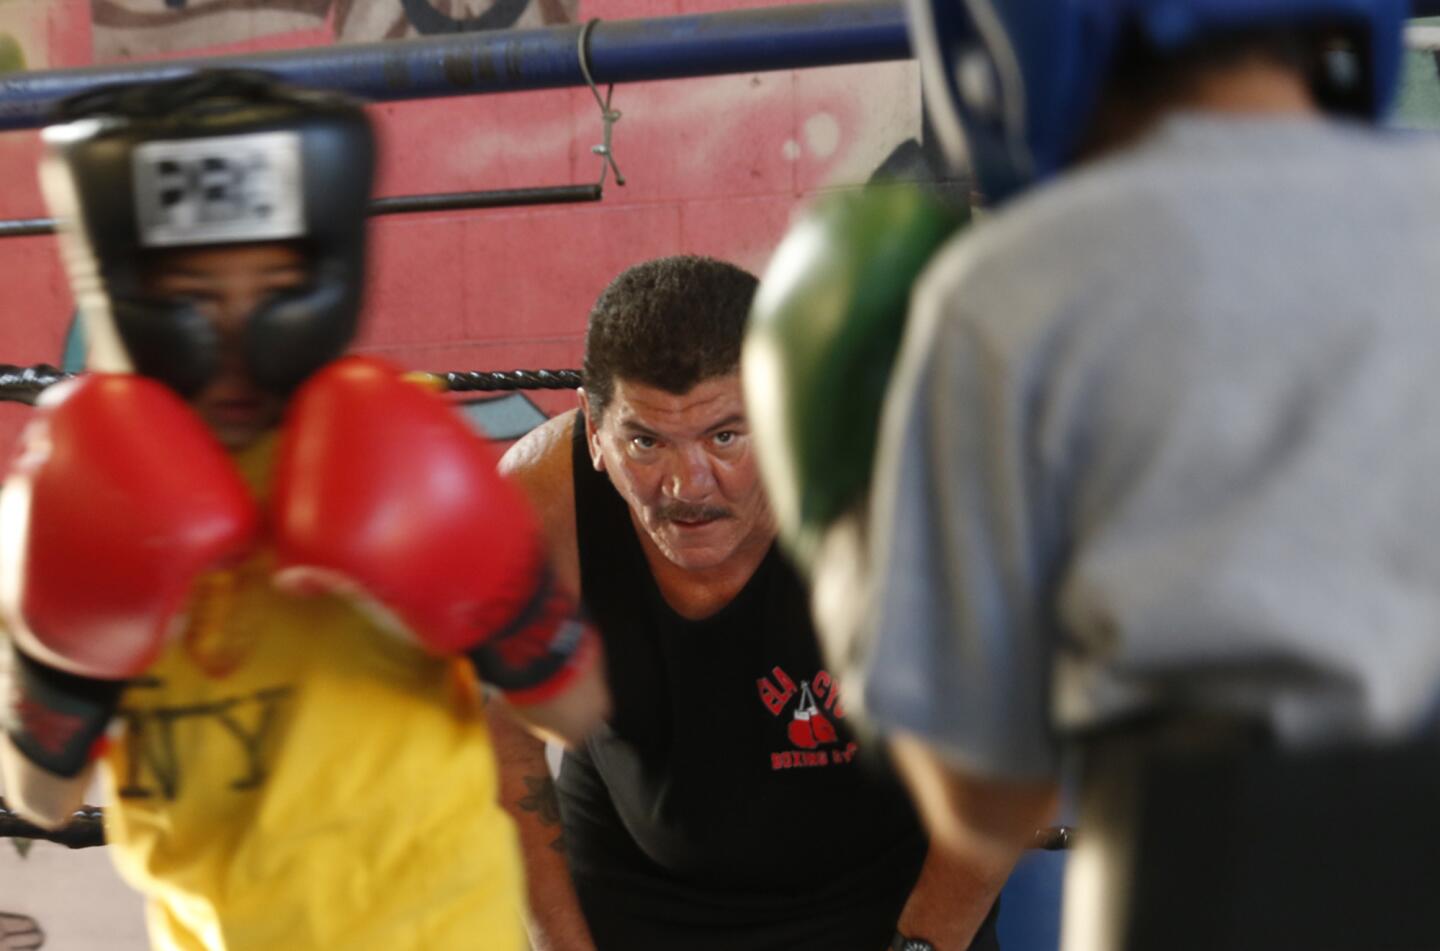 Boxing coach Paul Hernandez, 58, coaches and referees a sparring match between two young boxers at the East Los Angeles Community Youth Center in East Los Angeles on July 1. Hernandez has been fighting to keep the gym from closing due to the possible purchase of the property by a charter school.